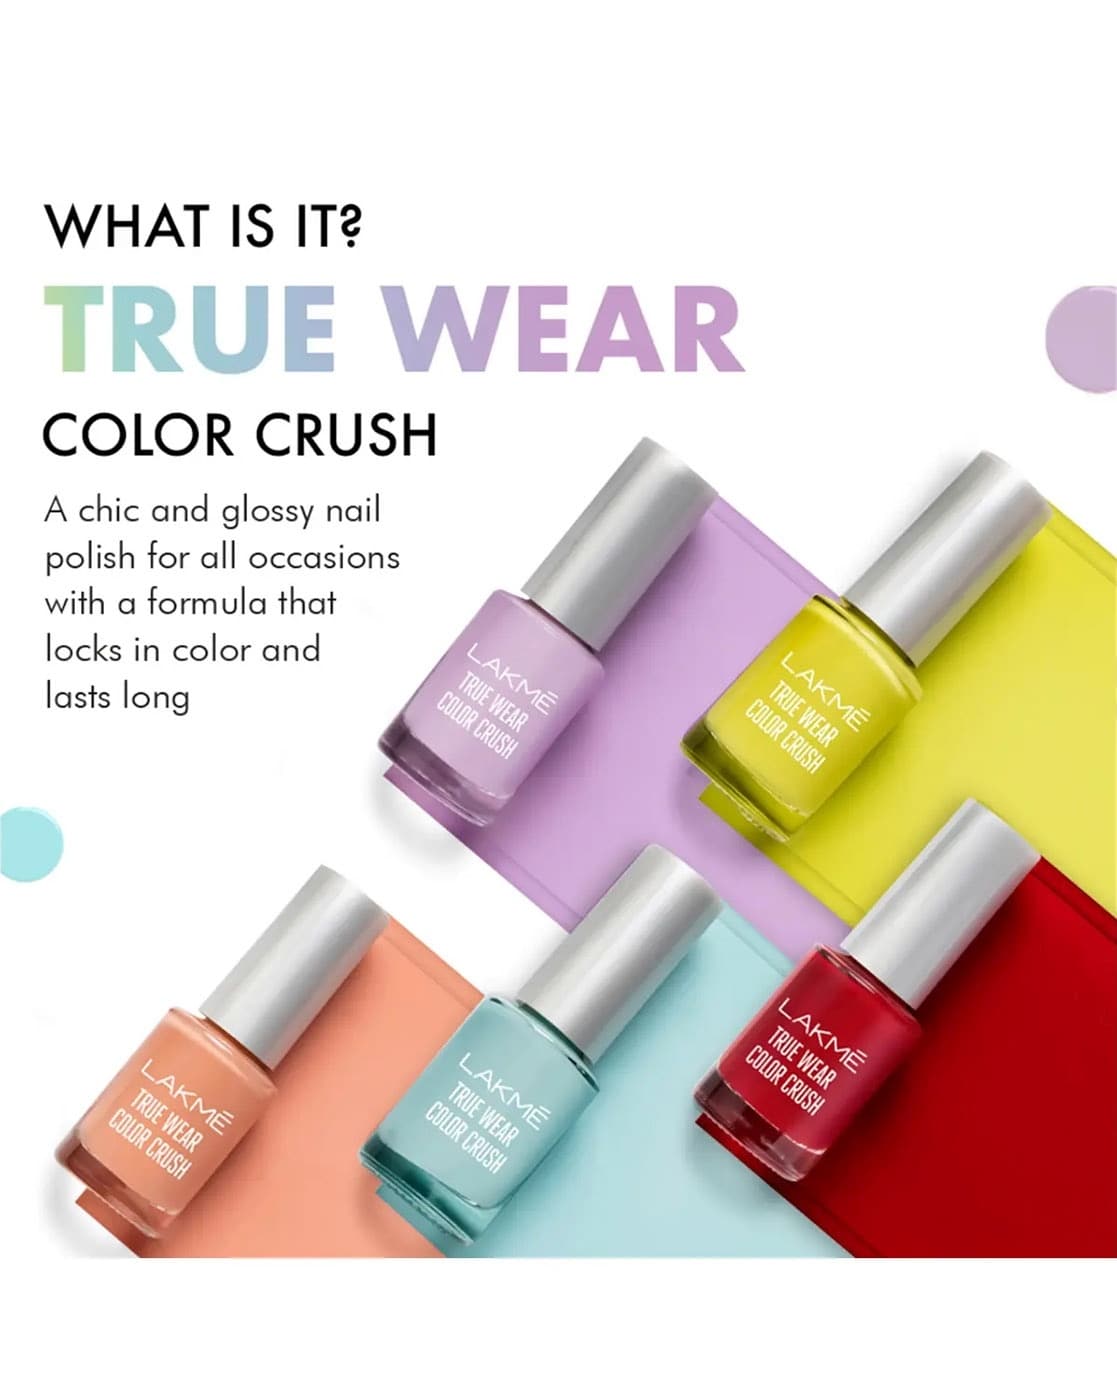 Lakmé True Wear Nail Color Shade 202 - Price in India, Buy Lakmé True Wear  Nail Color Shade 202 Online In India, Reviews, Ratings & Features |  Flipkart.com